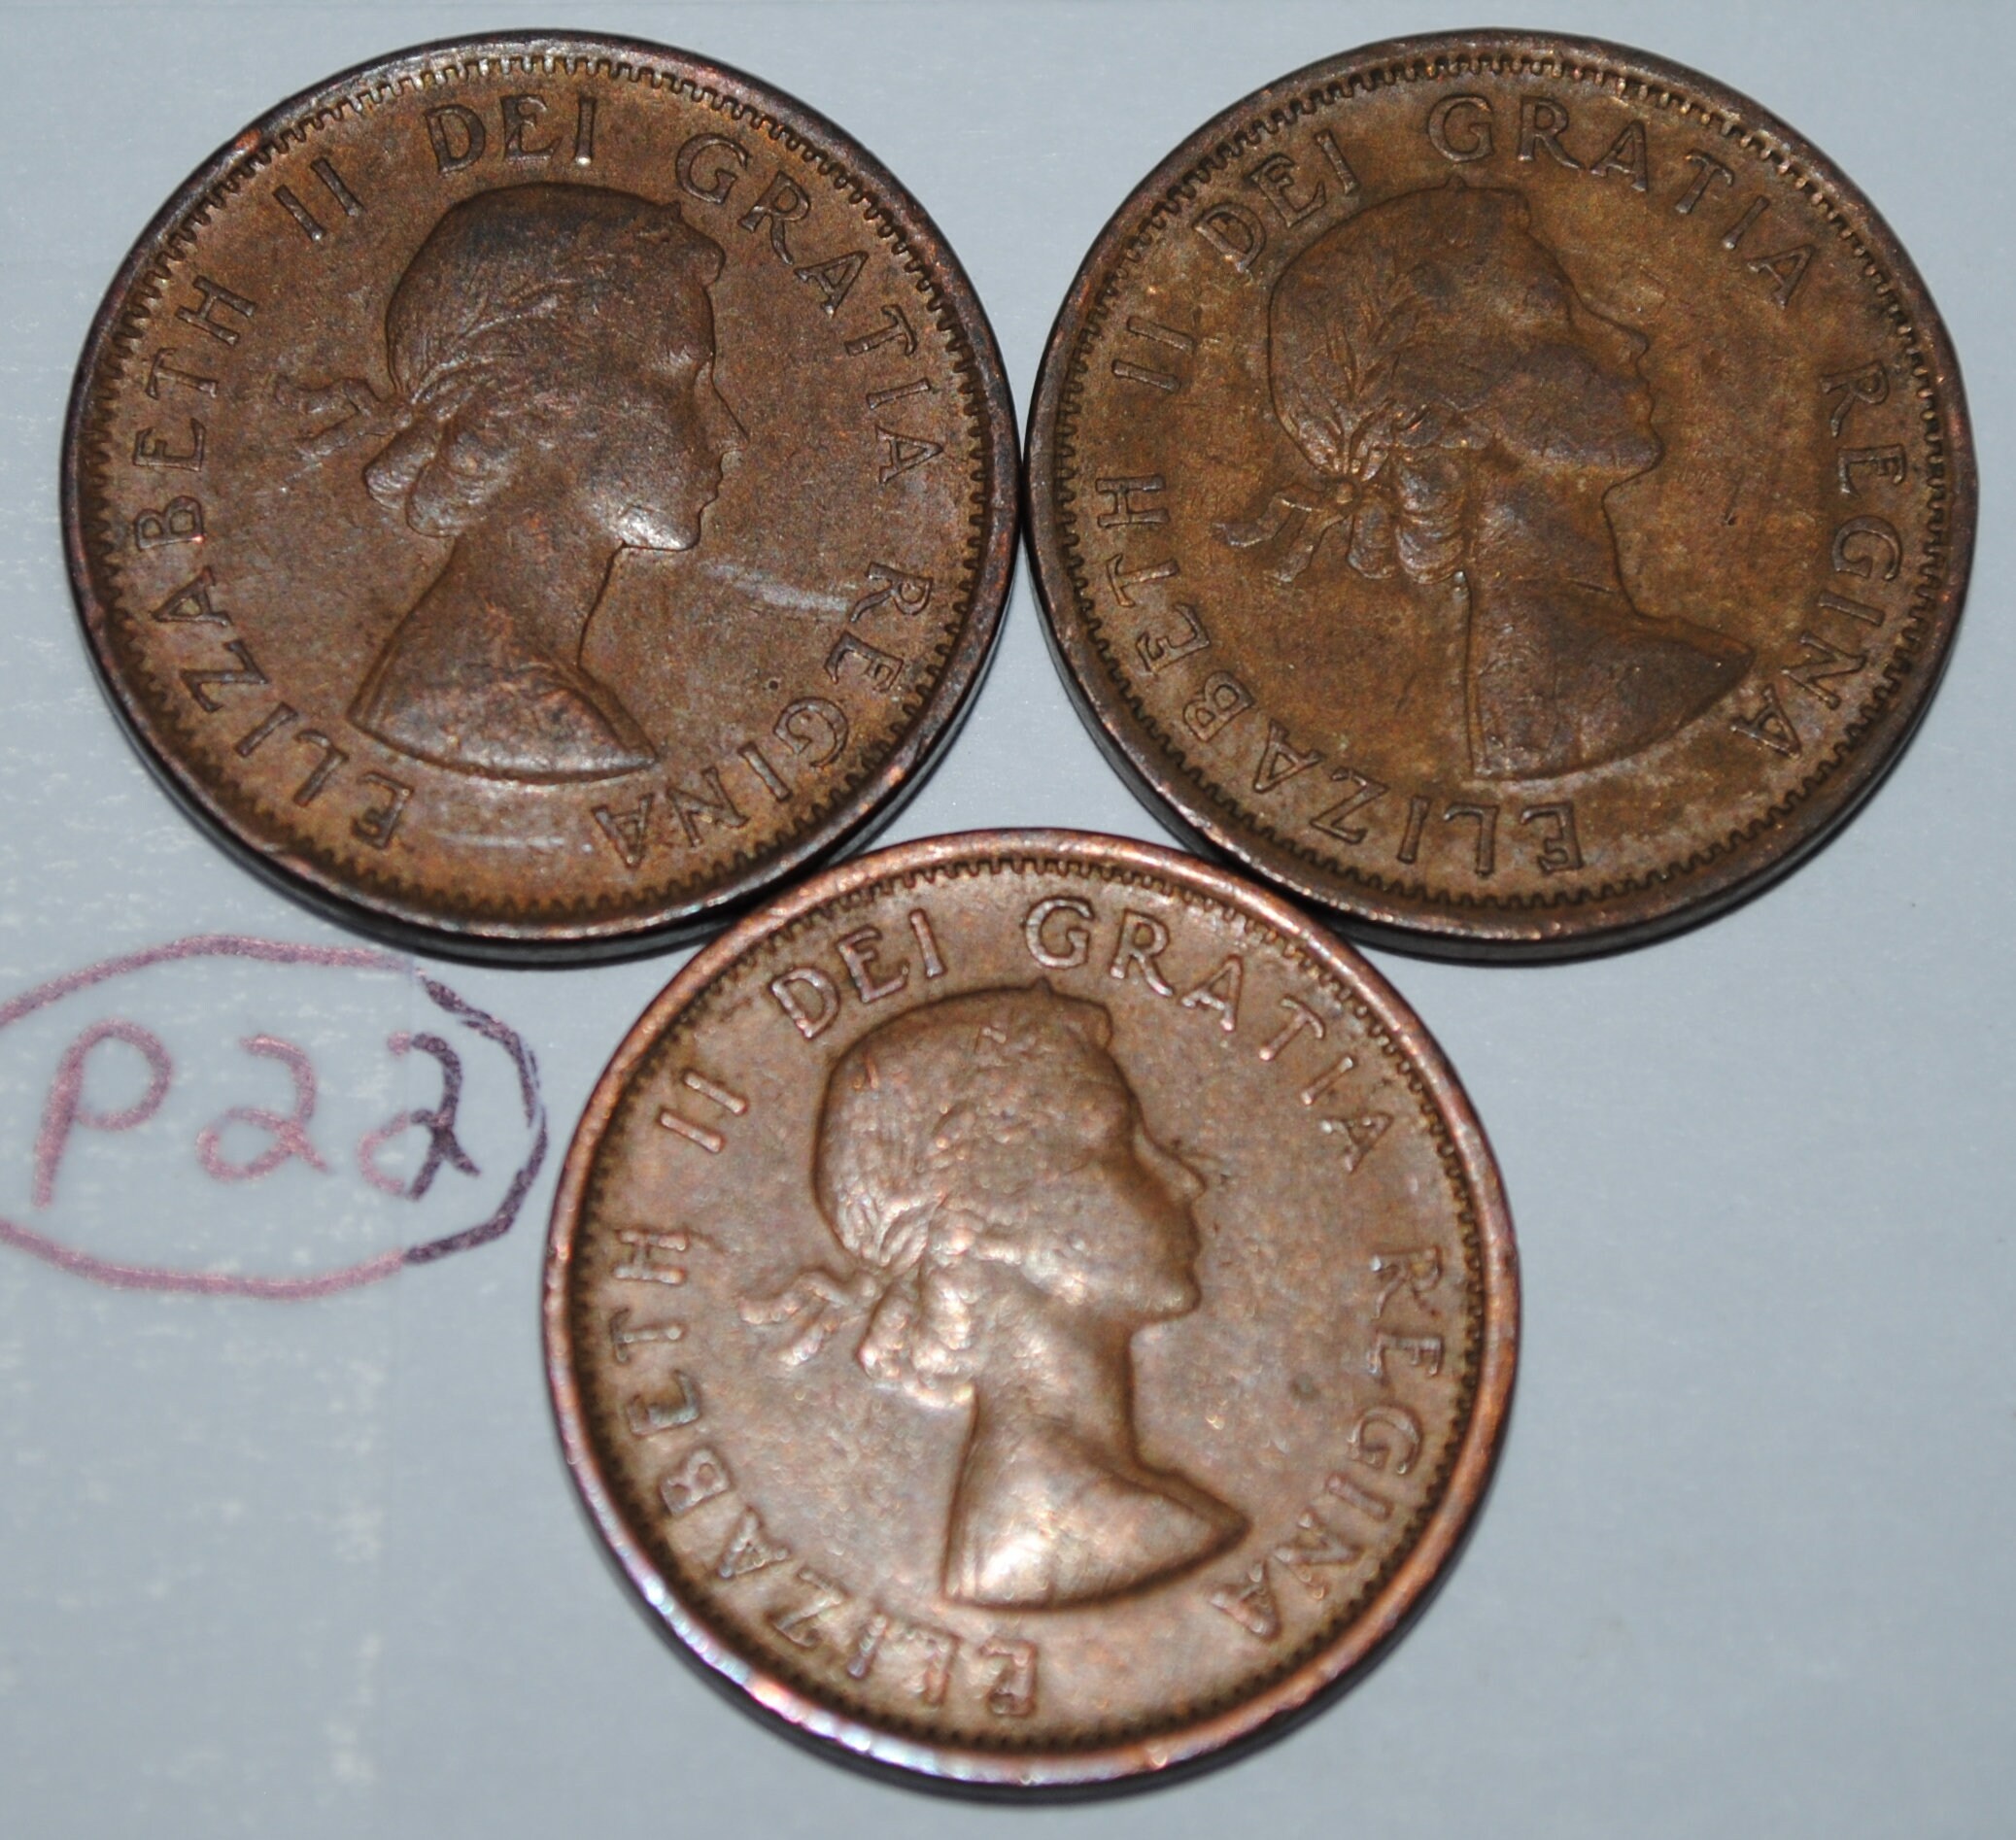 Canada 1932 1 Small cent Canadian one George V Penny coin Lot #642